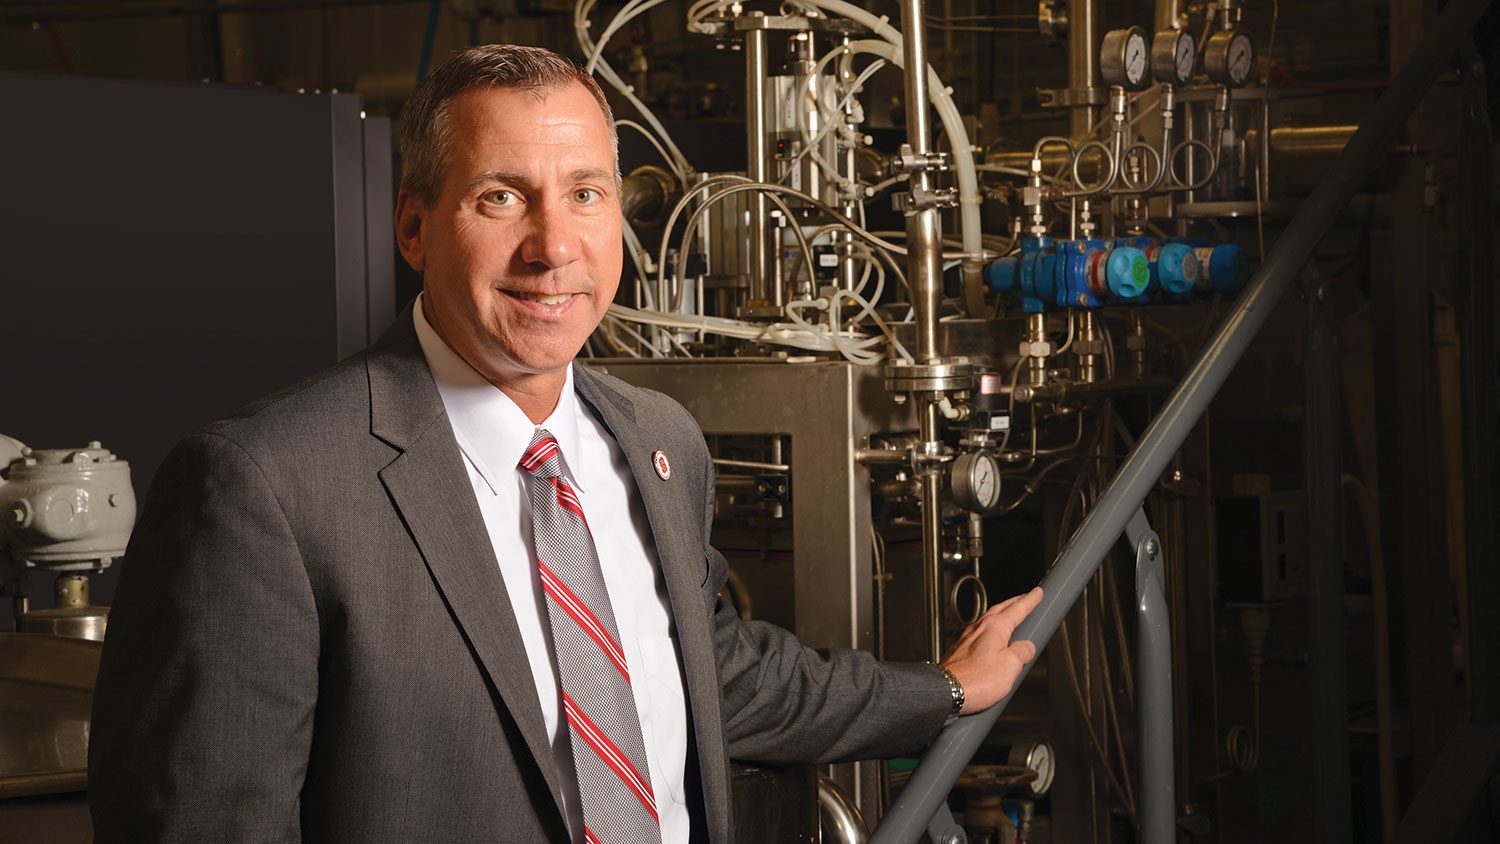 Chris Daubert, head of the NC State Department of Food, Bioprocessing and Nutrition Sciences